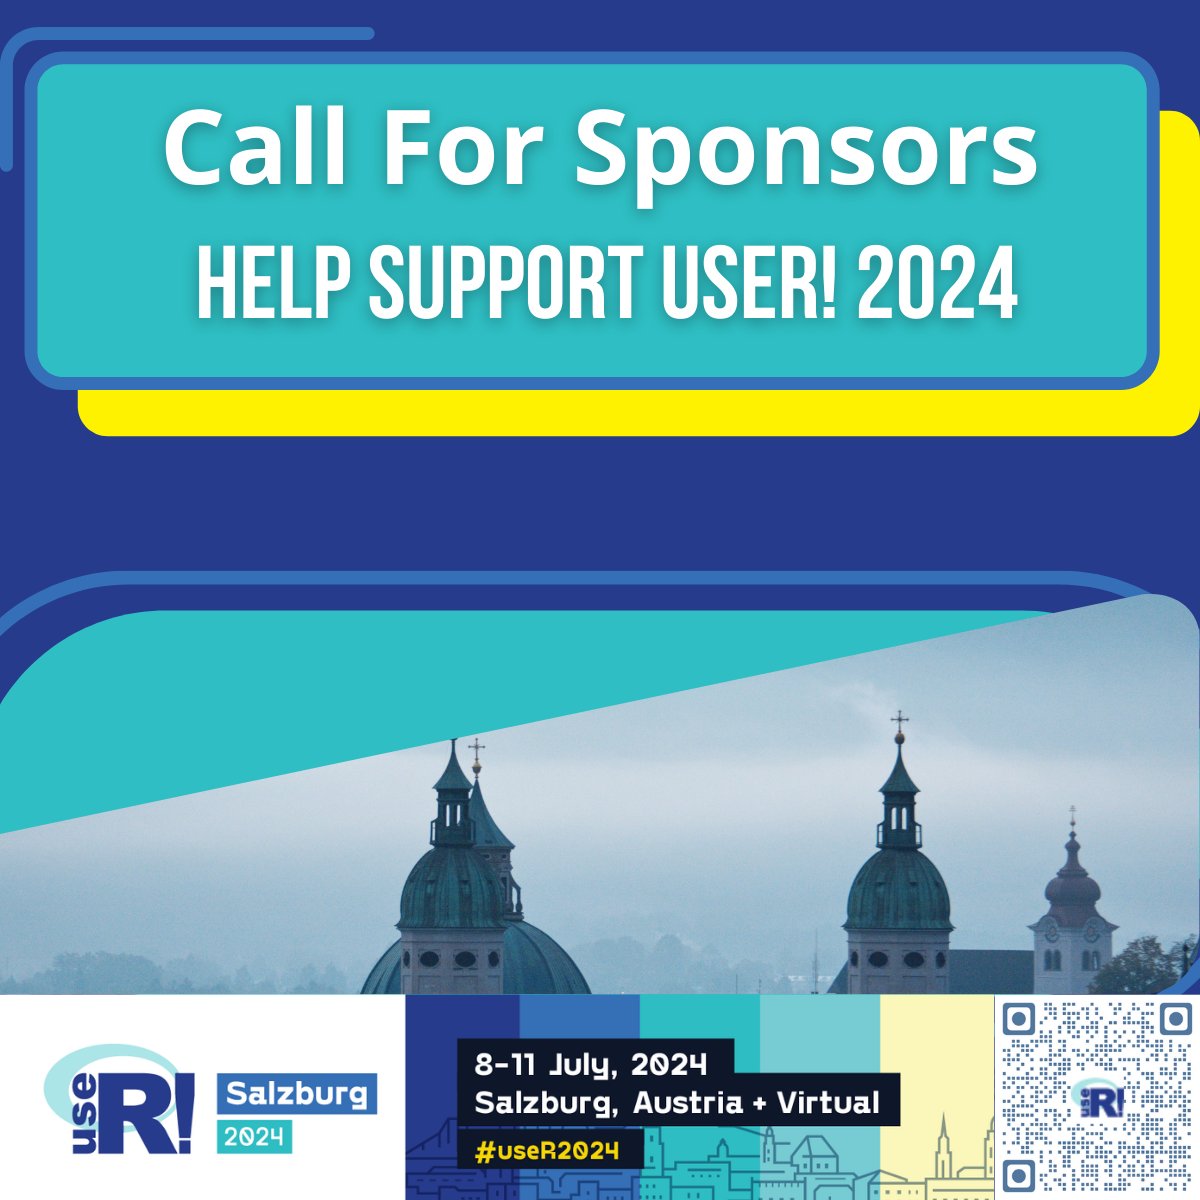 Sponsorship Opportunities are now available for UseR! 2024. UseR! 2024 is the annual R User Conference, and will be in Salzburg, Austria: July 8th to 11th (as well as online). events.linuxfoundation.org/user/ #rstats #rlanguage #data #analytics #rprogramming